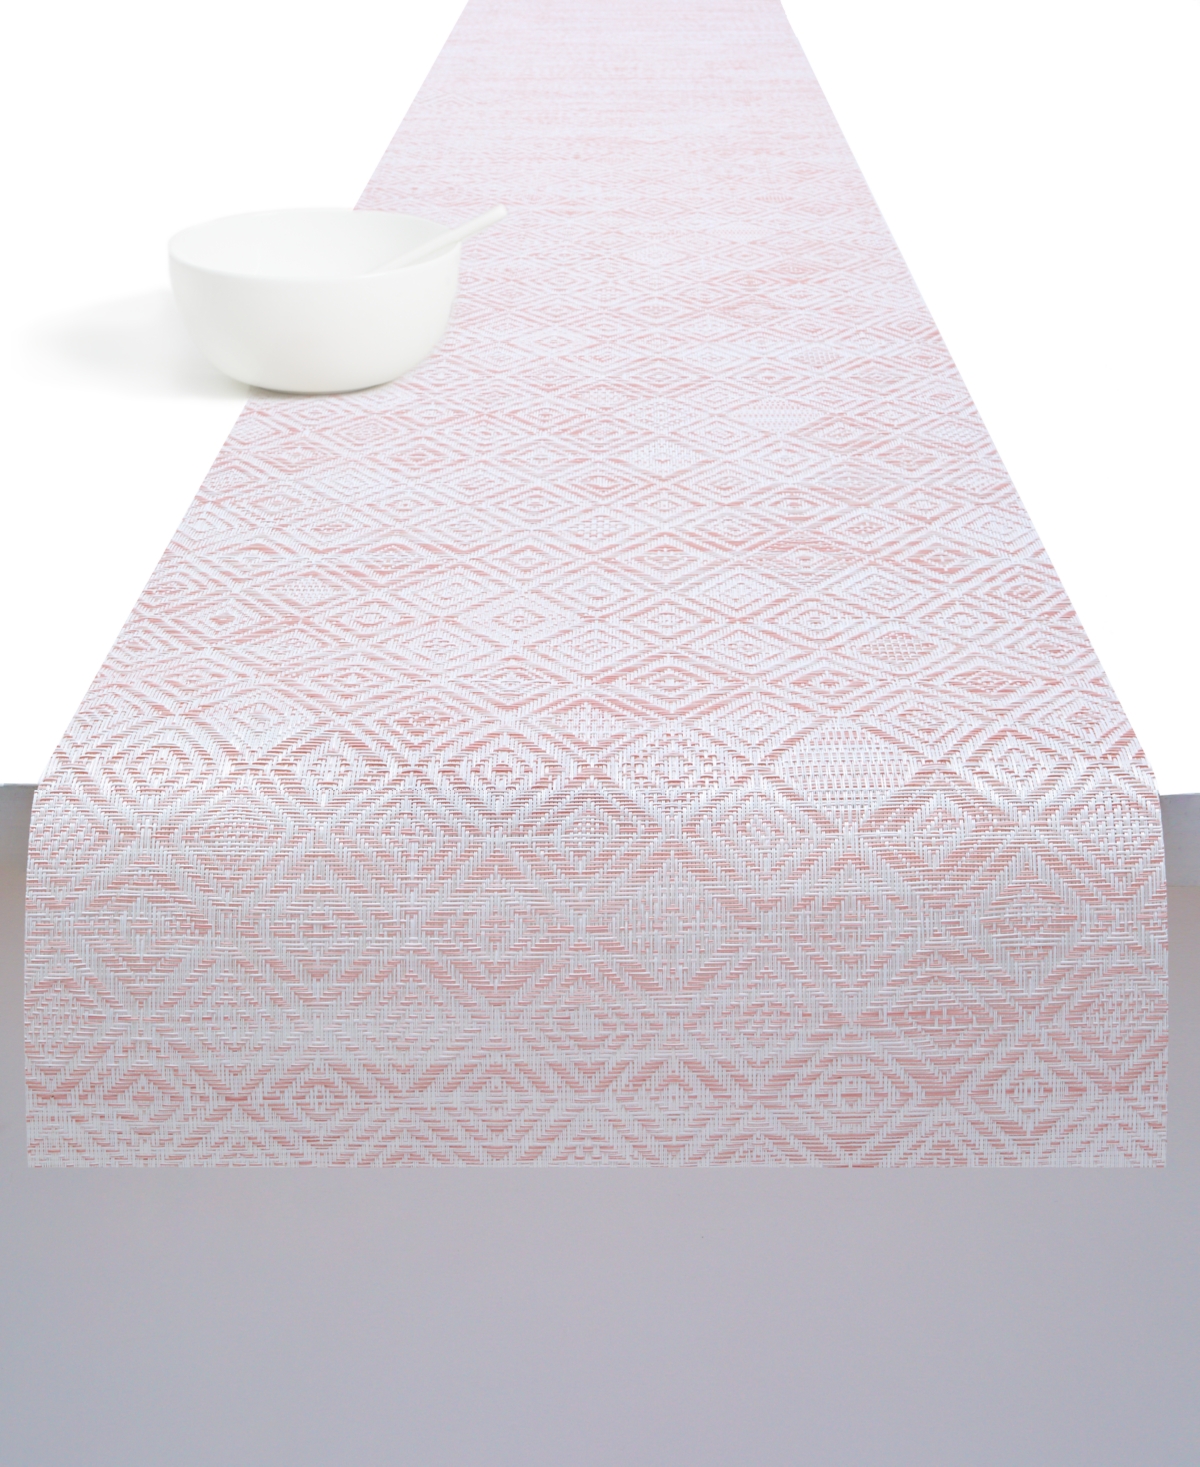 Chilewich Mosaic Table Runner